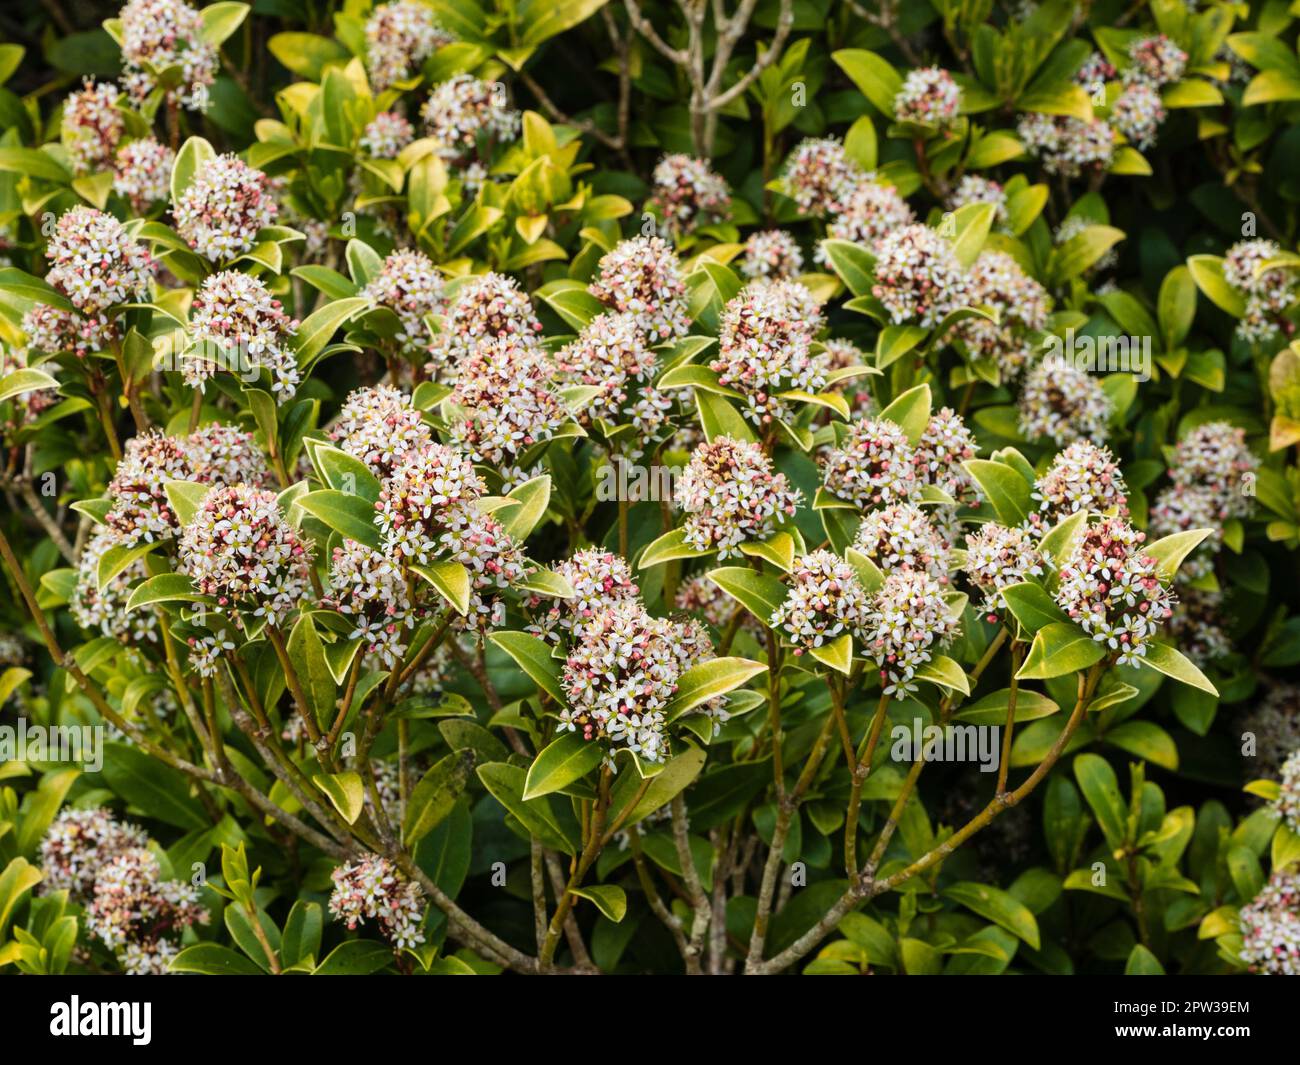 Massed flower heads of the spring flowering evergreen shrub, Skimmia japonica 'Ruby Dome' Stock Photo